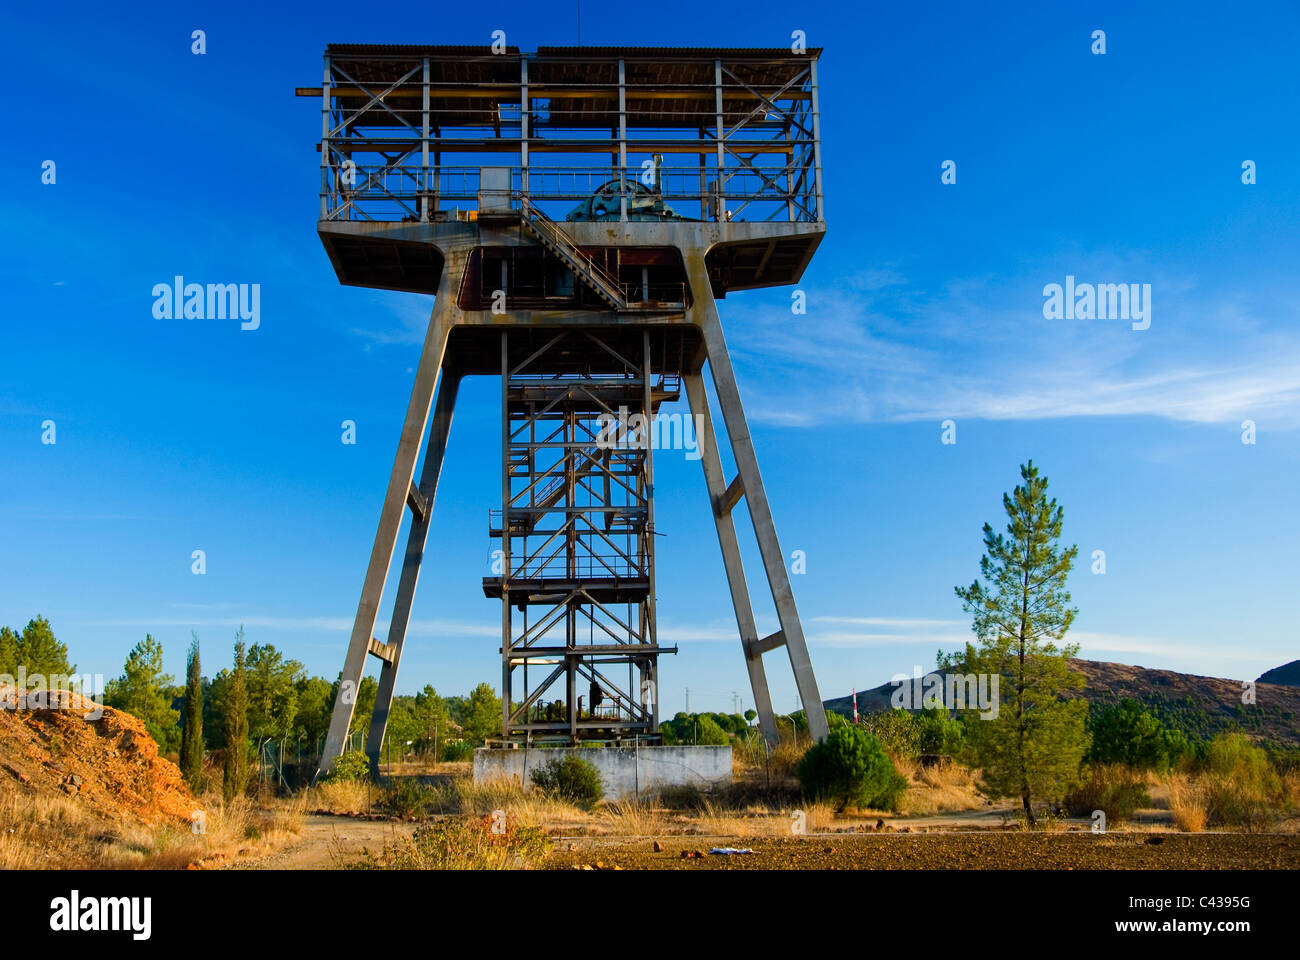 Abandoned big old mining shaft tower on blue background, part of the Route of Industrial Culture Riotinto Nerva, Huelva, Spain Stock Photo